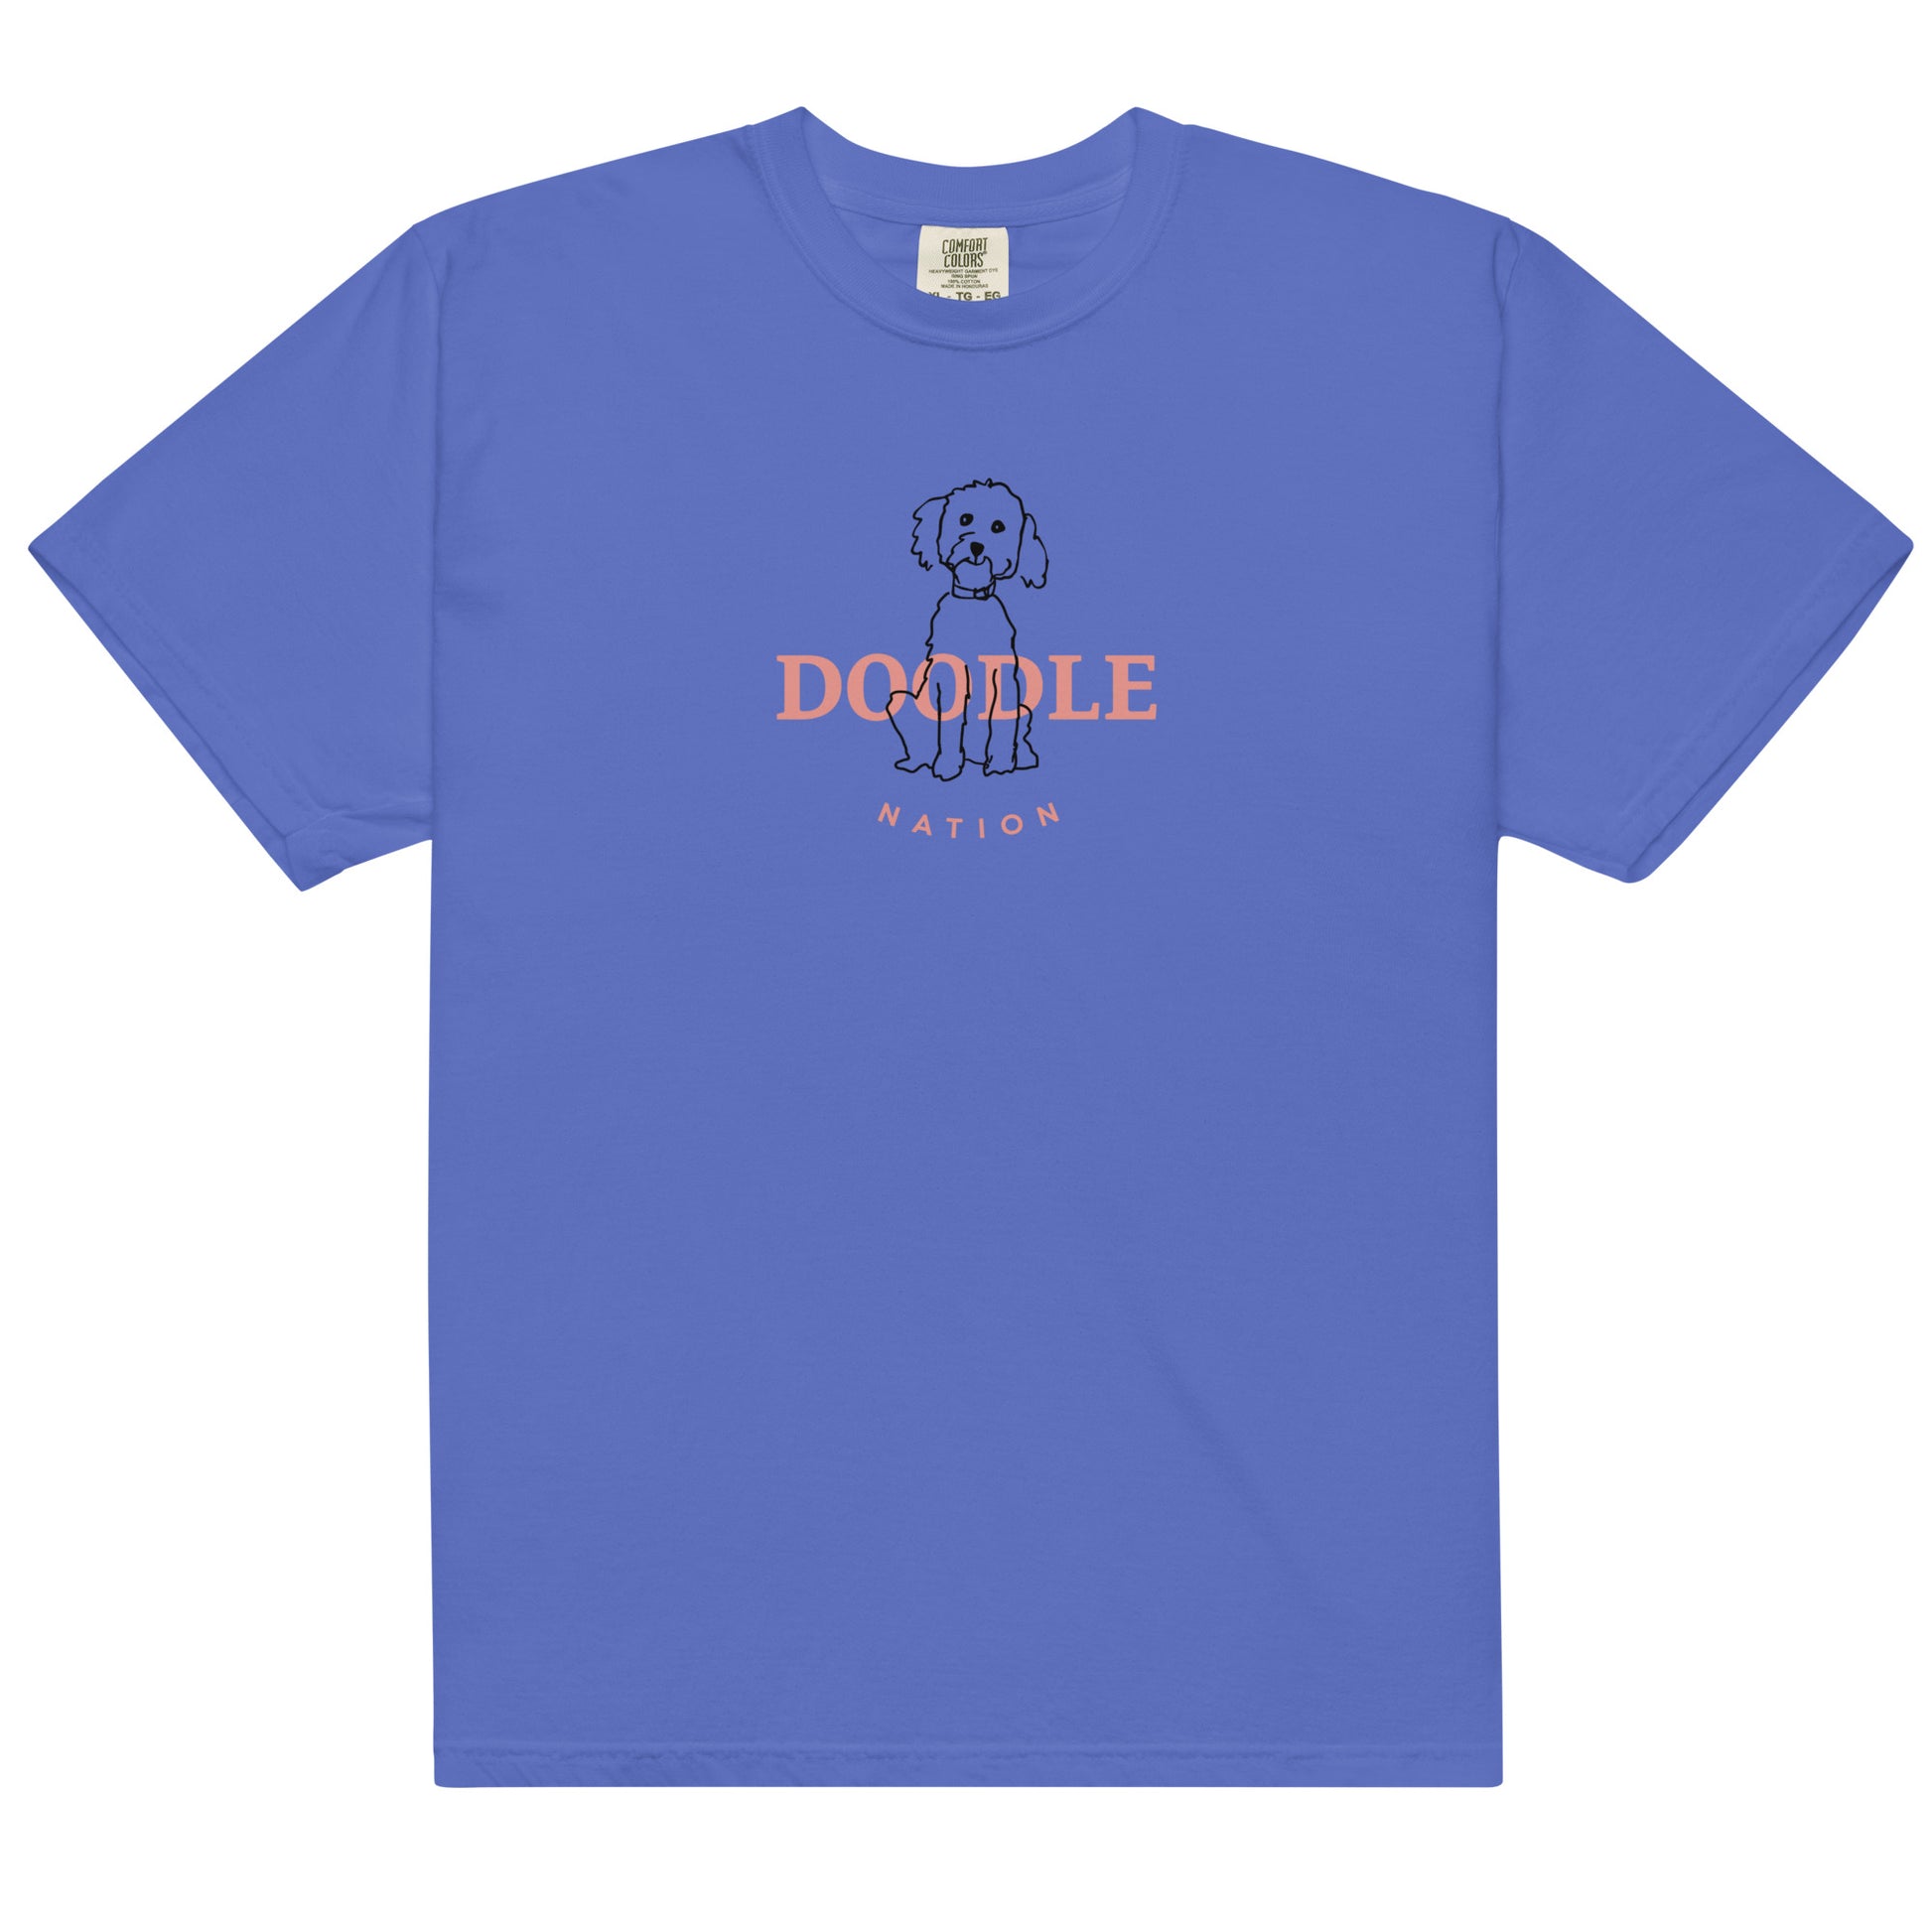 Goldendoodle comfort colors t-shirt with Goldendoodle and words "Doodle Nation" in flo blue color